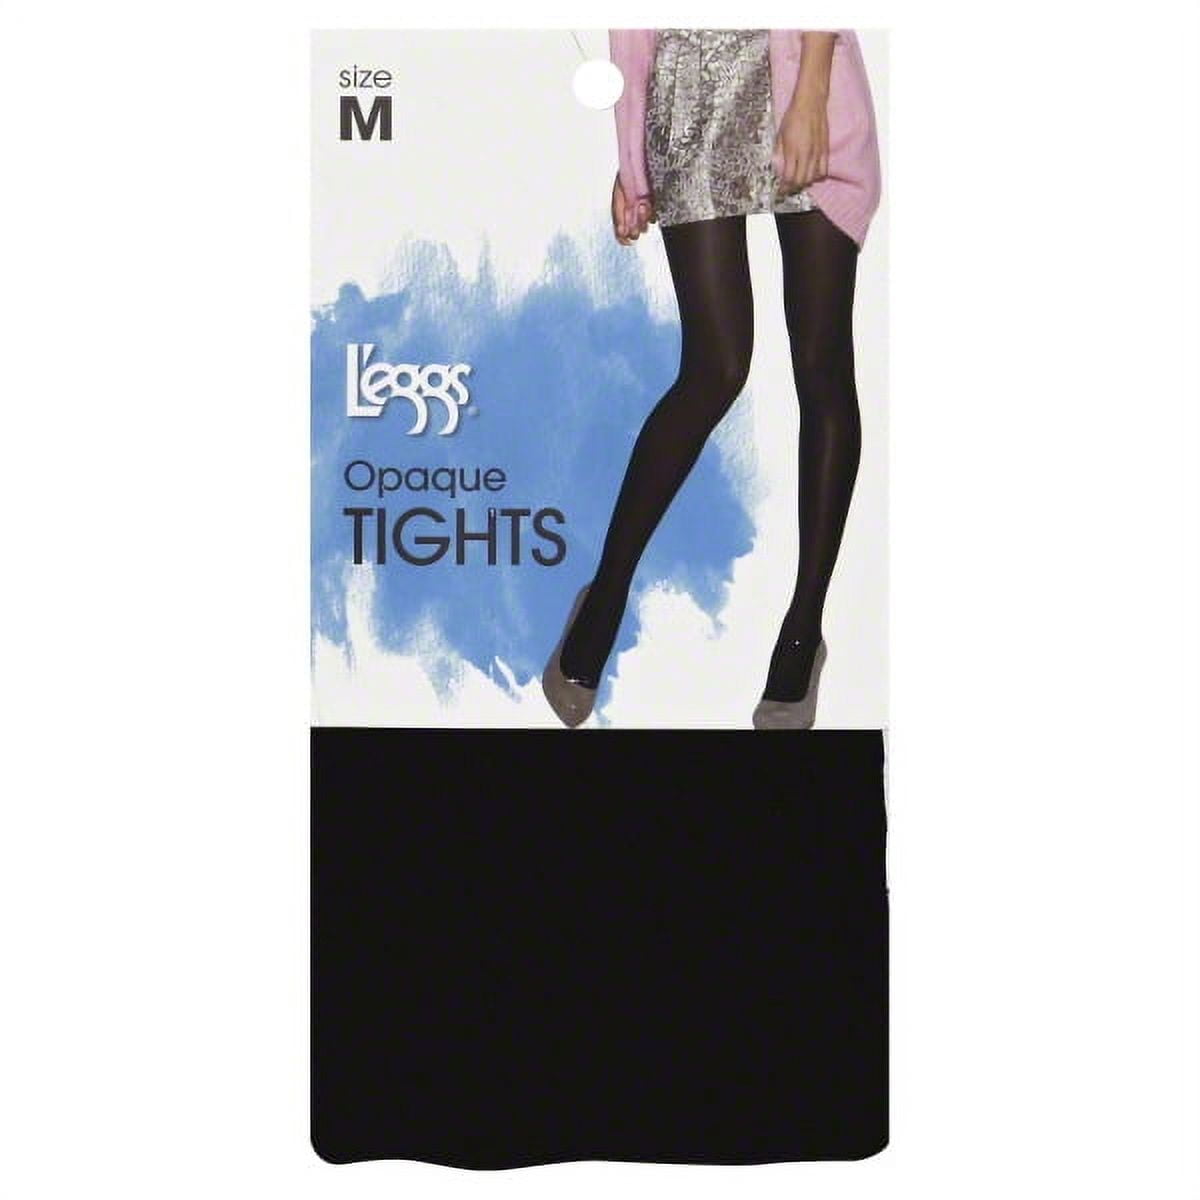 L'eggs Casuals Women's Black Silky Microfiber Opaque Tight (1 pair pack) 